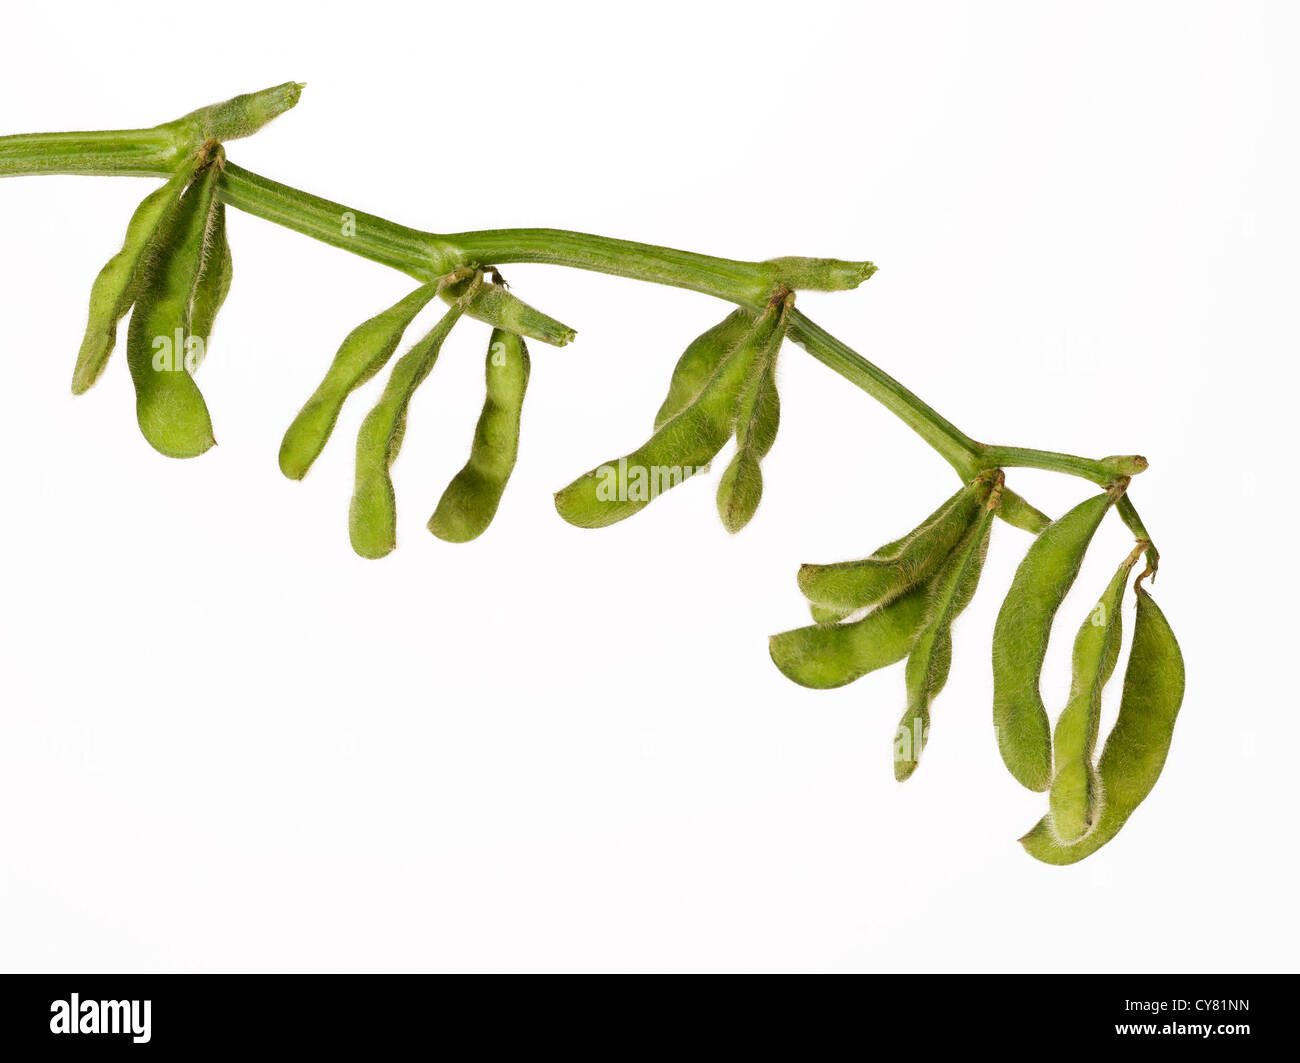 Soybean Pods Hanging on Branch Stock Photo